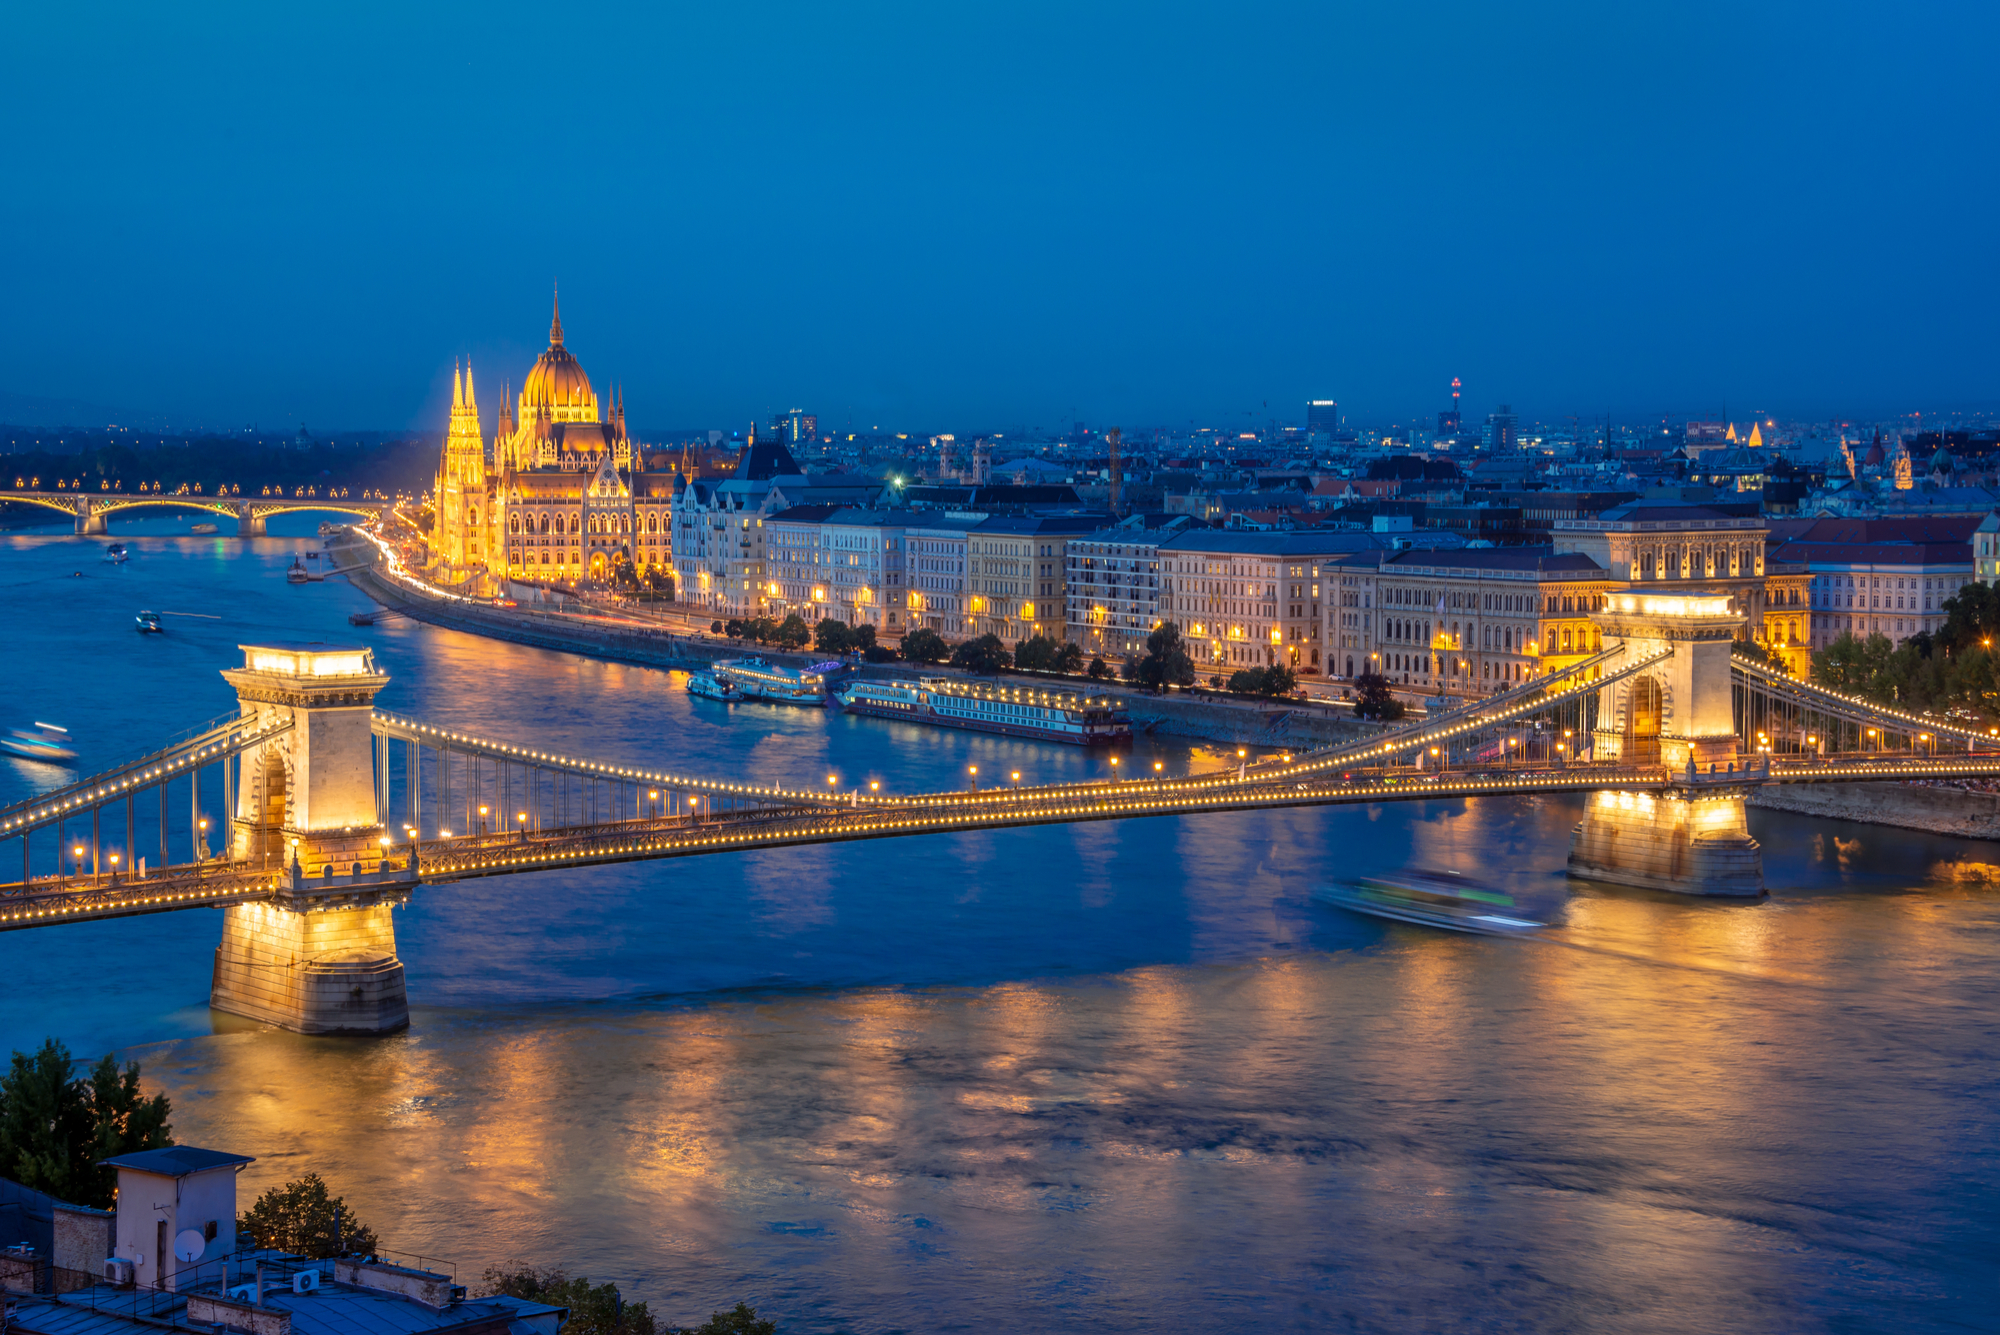 Budapest at night (Image: Delpixel/Shutterstock)